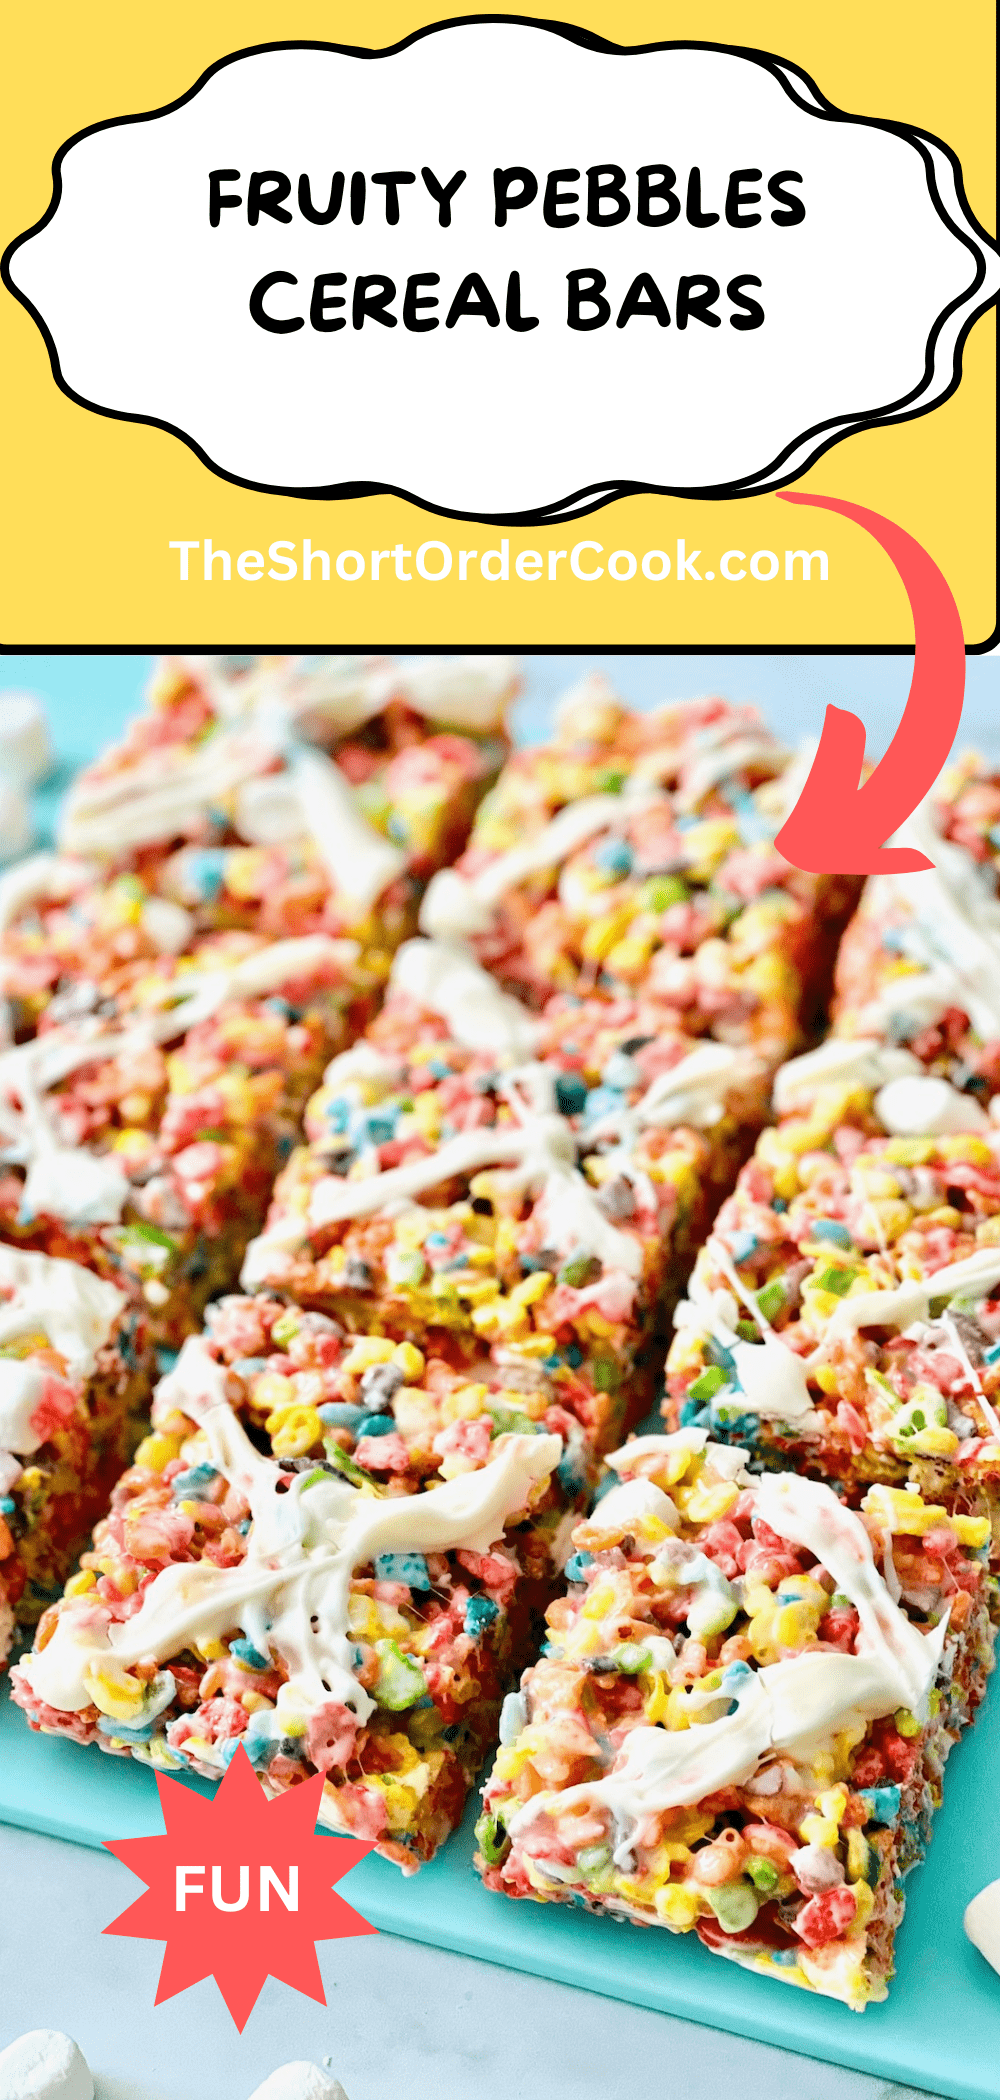 Fruity Pebbles Cereal Bars cut into squares on a cutting board.